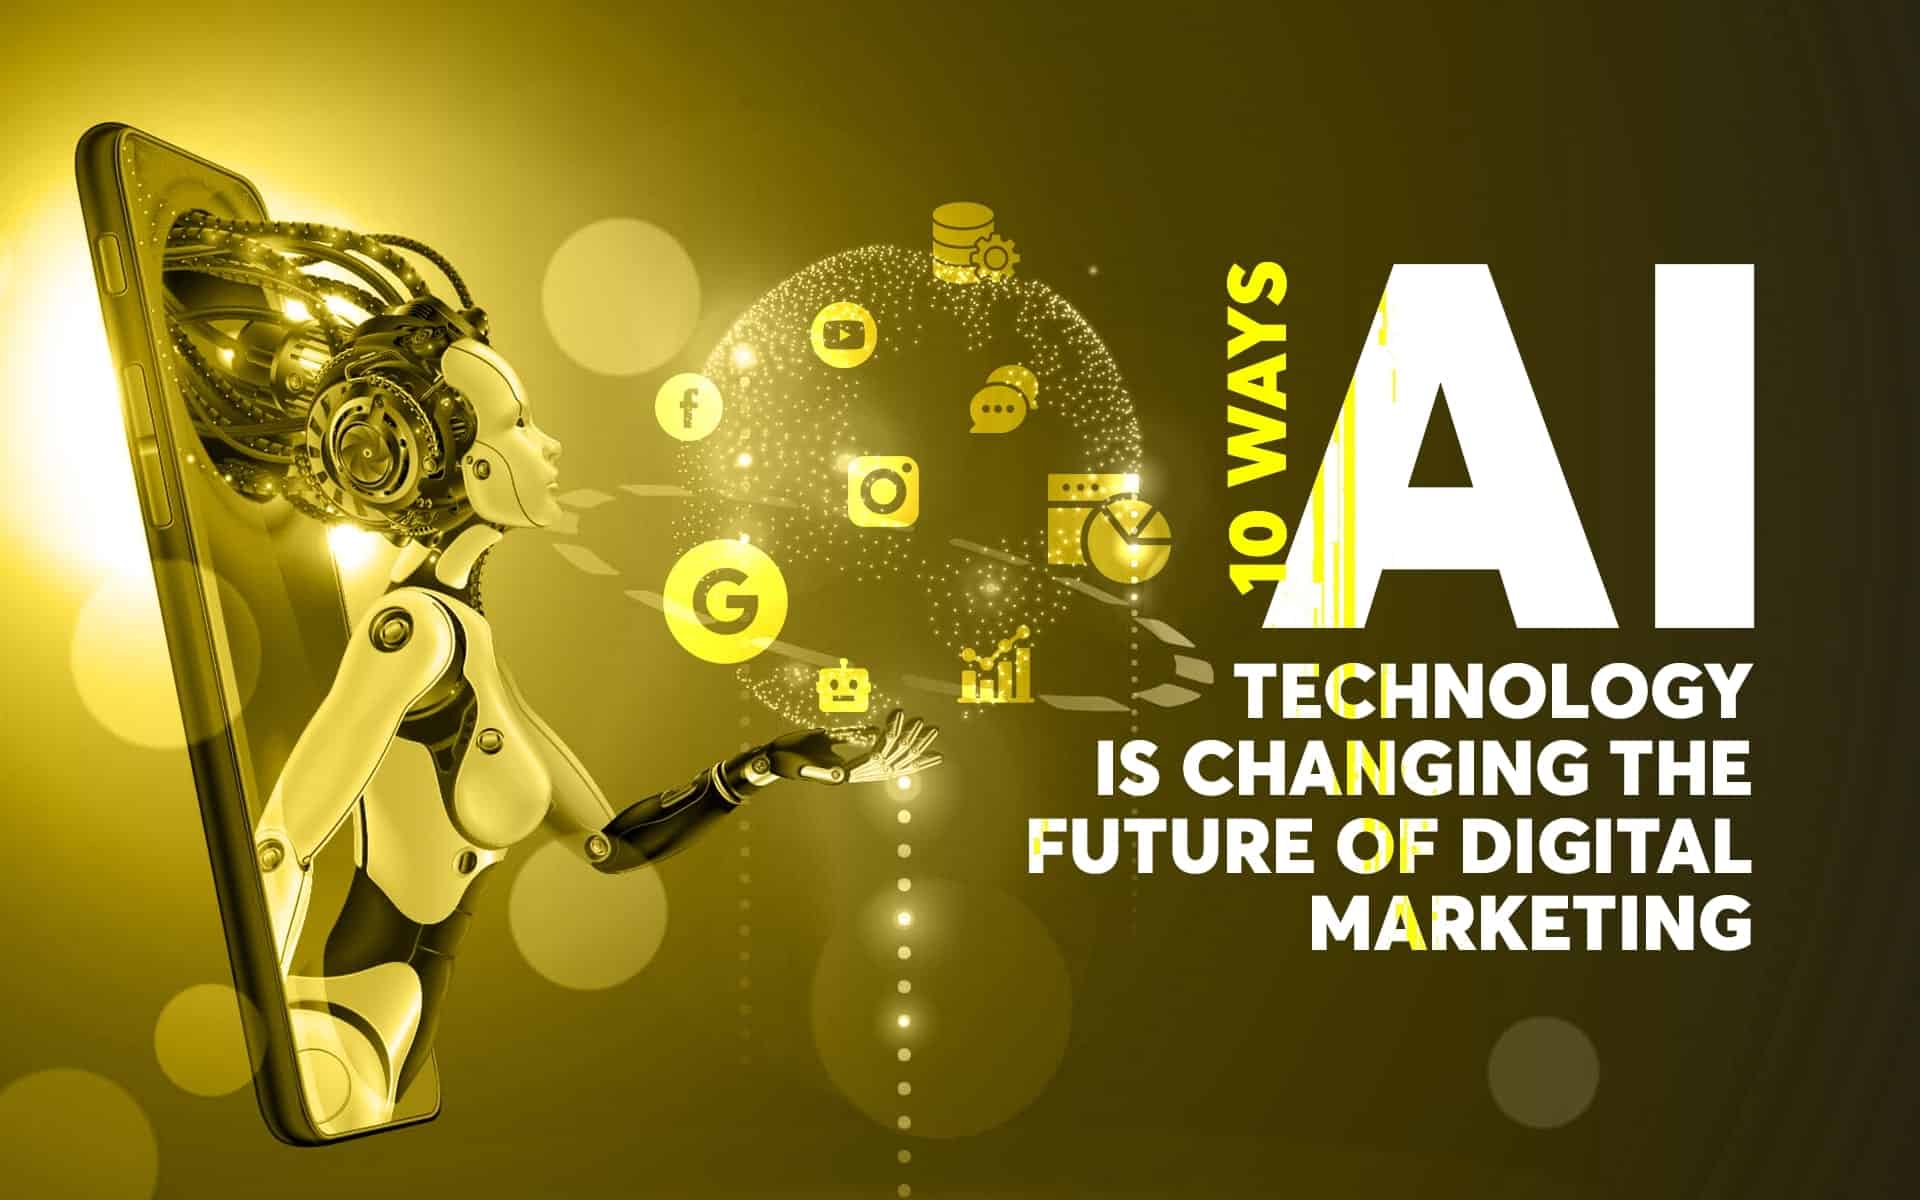 10 AI Technology that changing the future of digital marketing